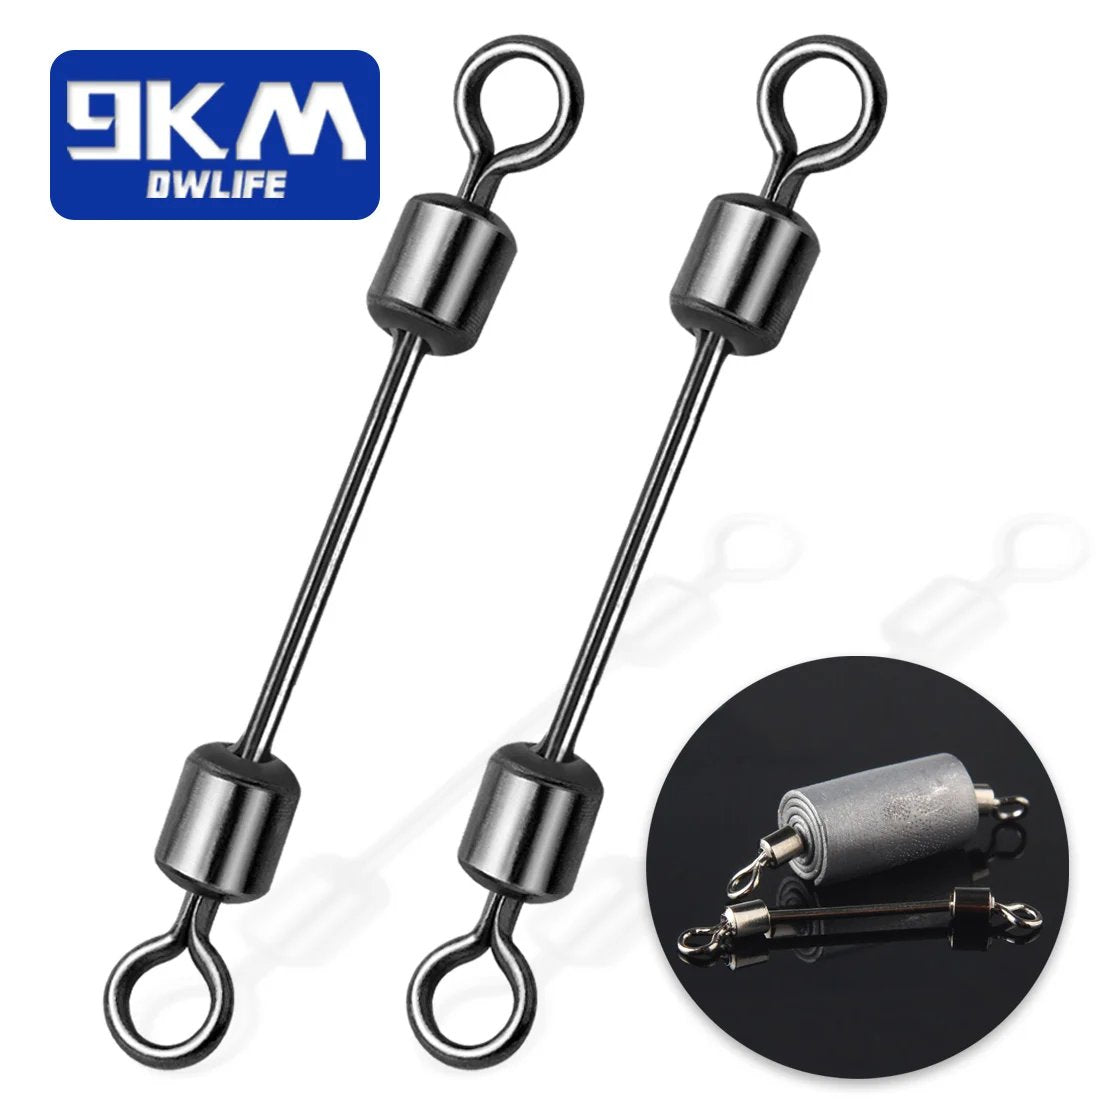 Fishing Sinker Connector Double Head Swivel Quick Fishing Line Lead Sheet Seat Freshwater Bass Carp Fishing Accessories Tackle